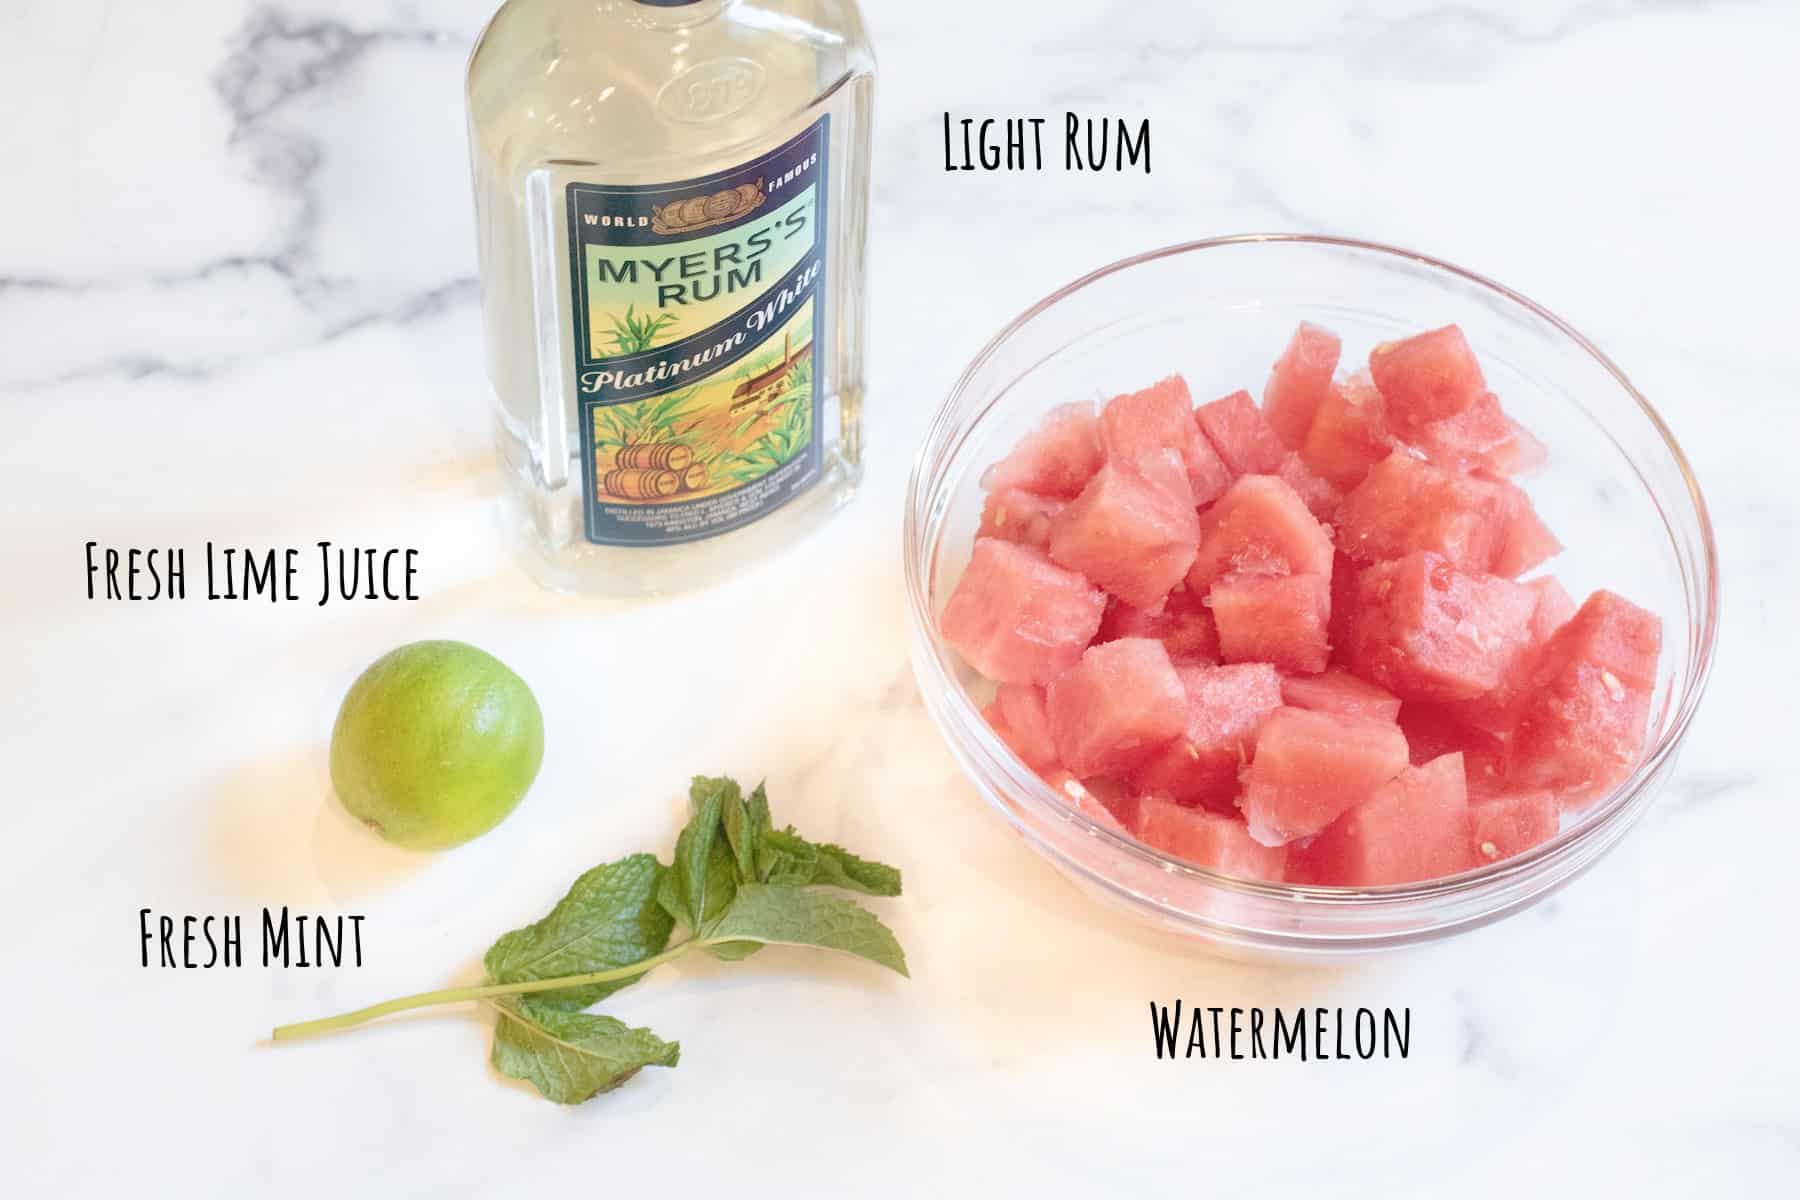 rum, lime, mint, and watermelon.